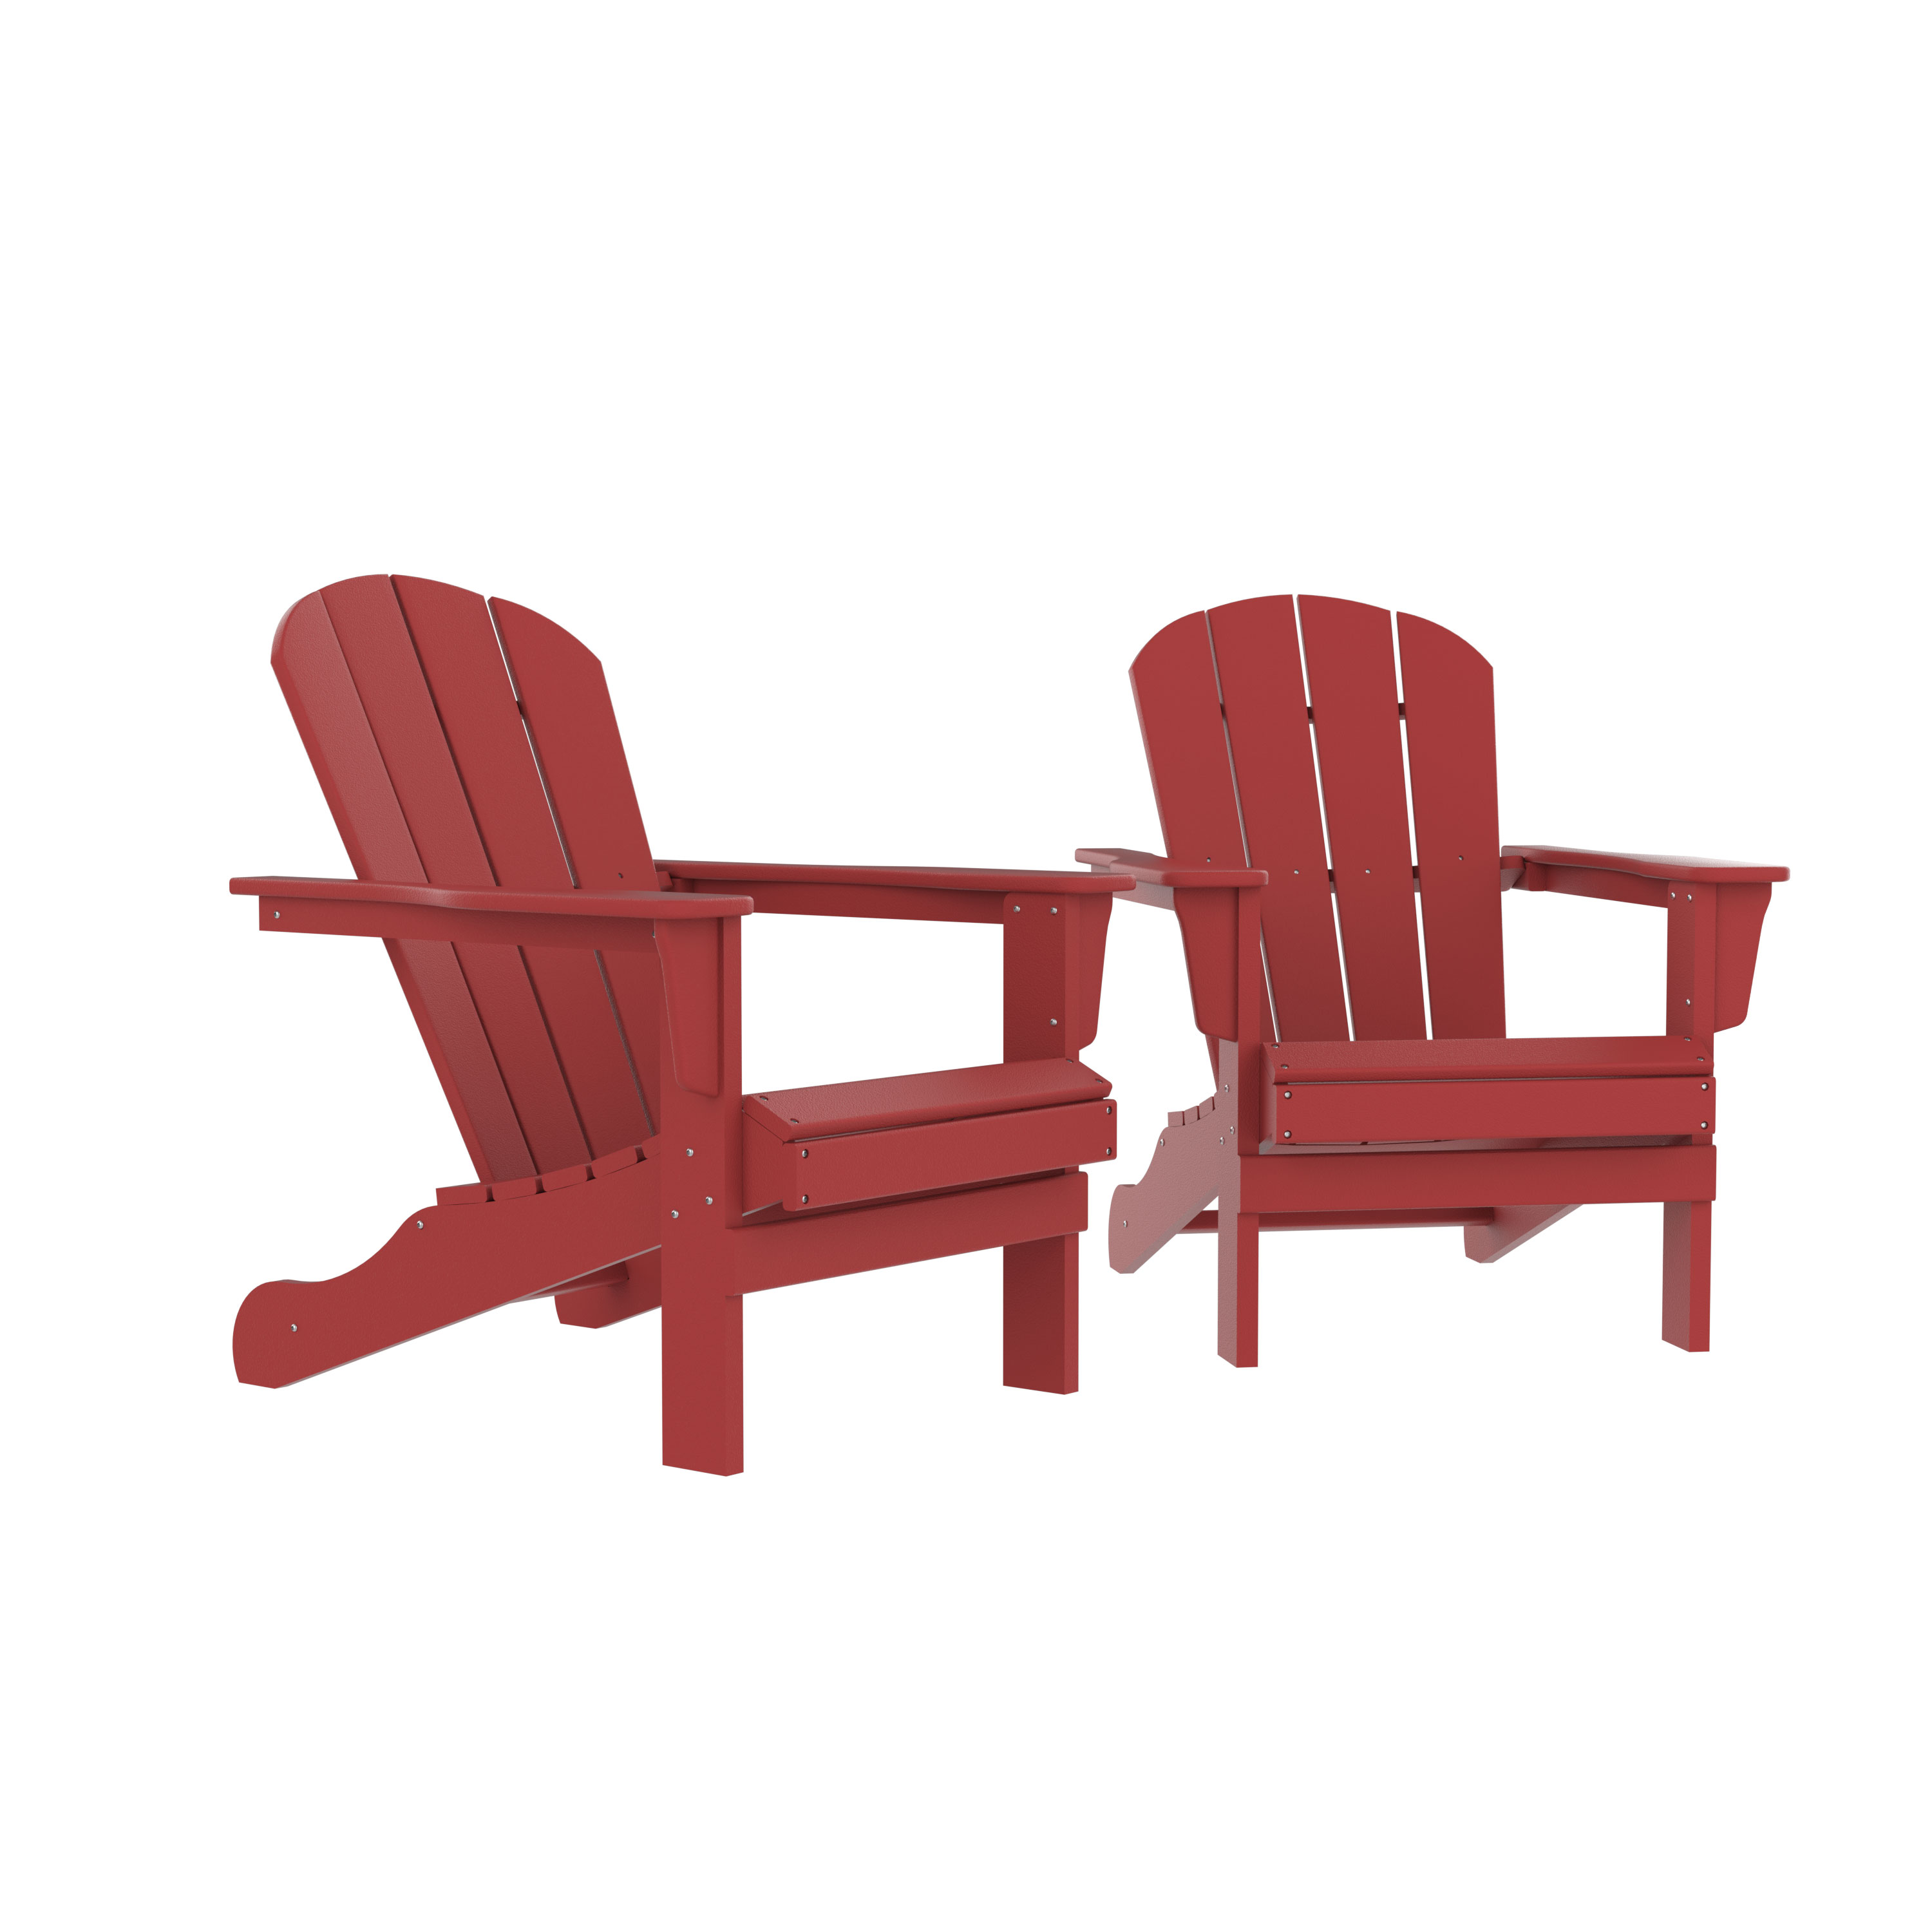 Sportaza HDPE Chair, Fire Pit Chairs, Sand Chair, Patio Outdoor Chairs,DPE Plastic Resin Deck Chair, lawn chairs, Adult Size ,Weather Resistant for Patio/ Backyard/Garden, Red, Set of 2 - image 1 of 6